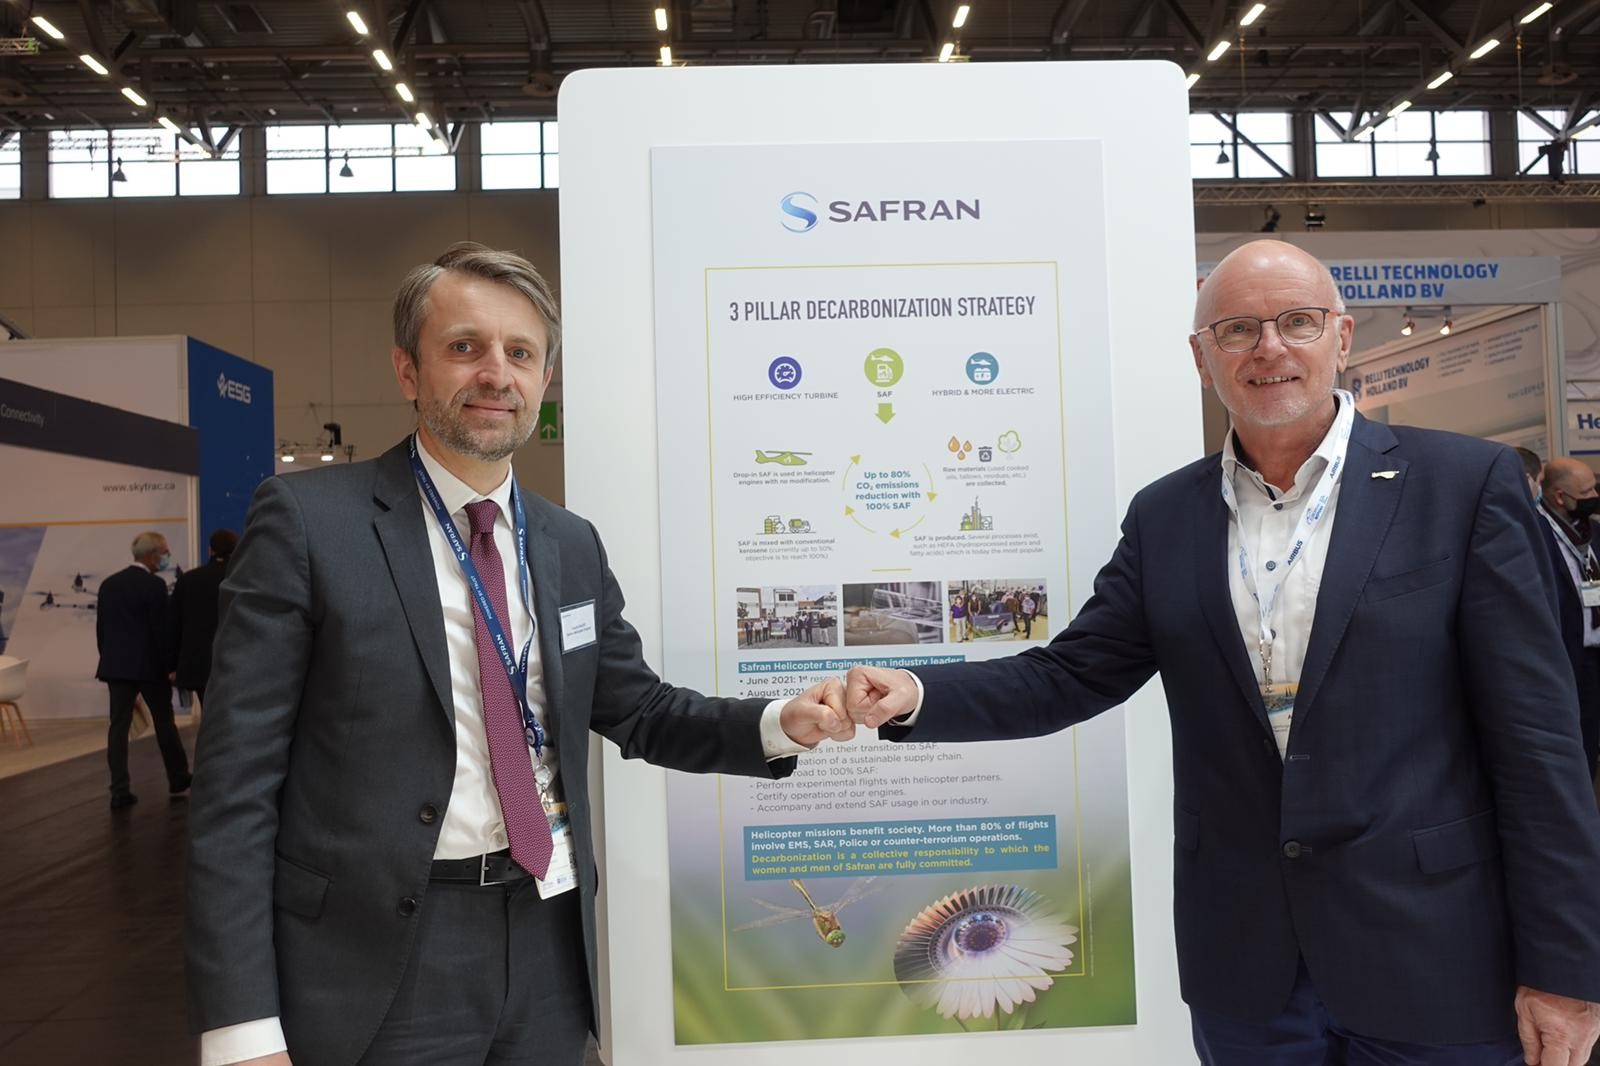 EUROPEAN ROTORS: Safran and ÖAMTC Air Rescue to introduce sustainable aviation fuel in Arrius-powered helicopter fleet